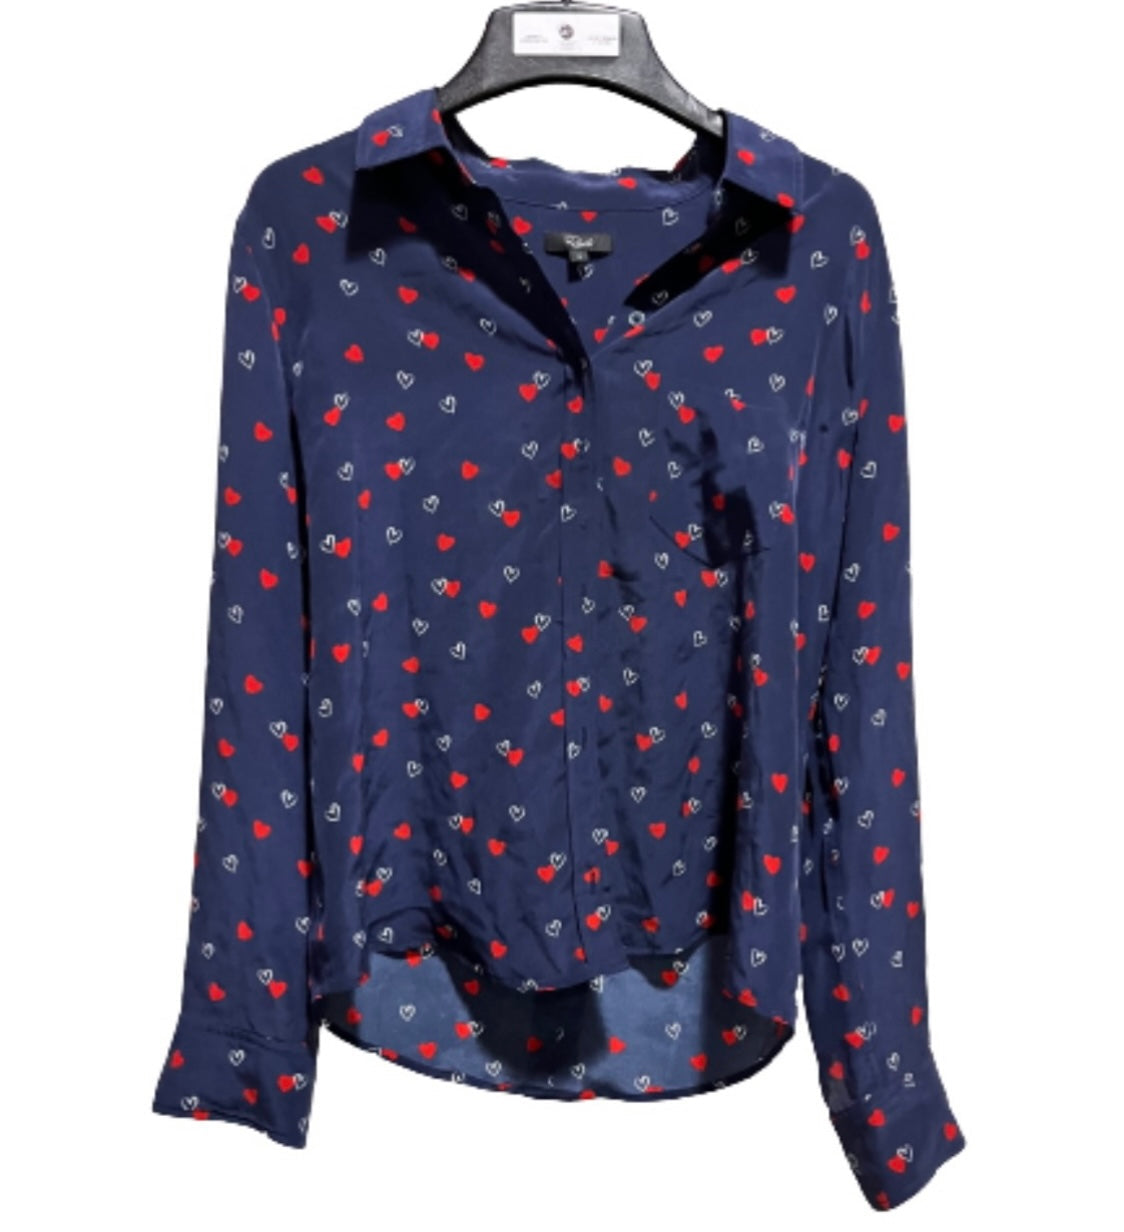 VEEP: Selina Meyer's Red Hearts Blouse (S)